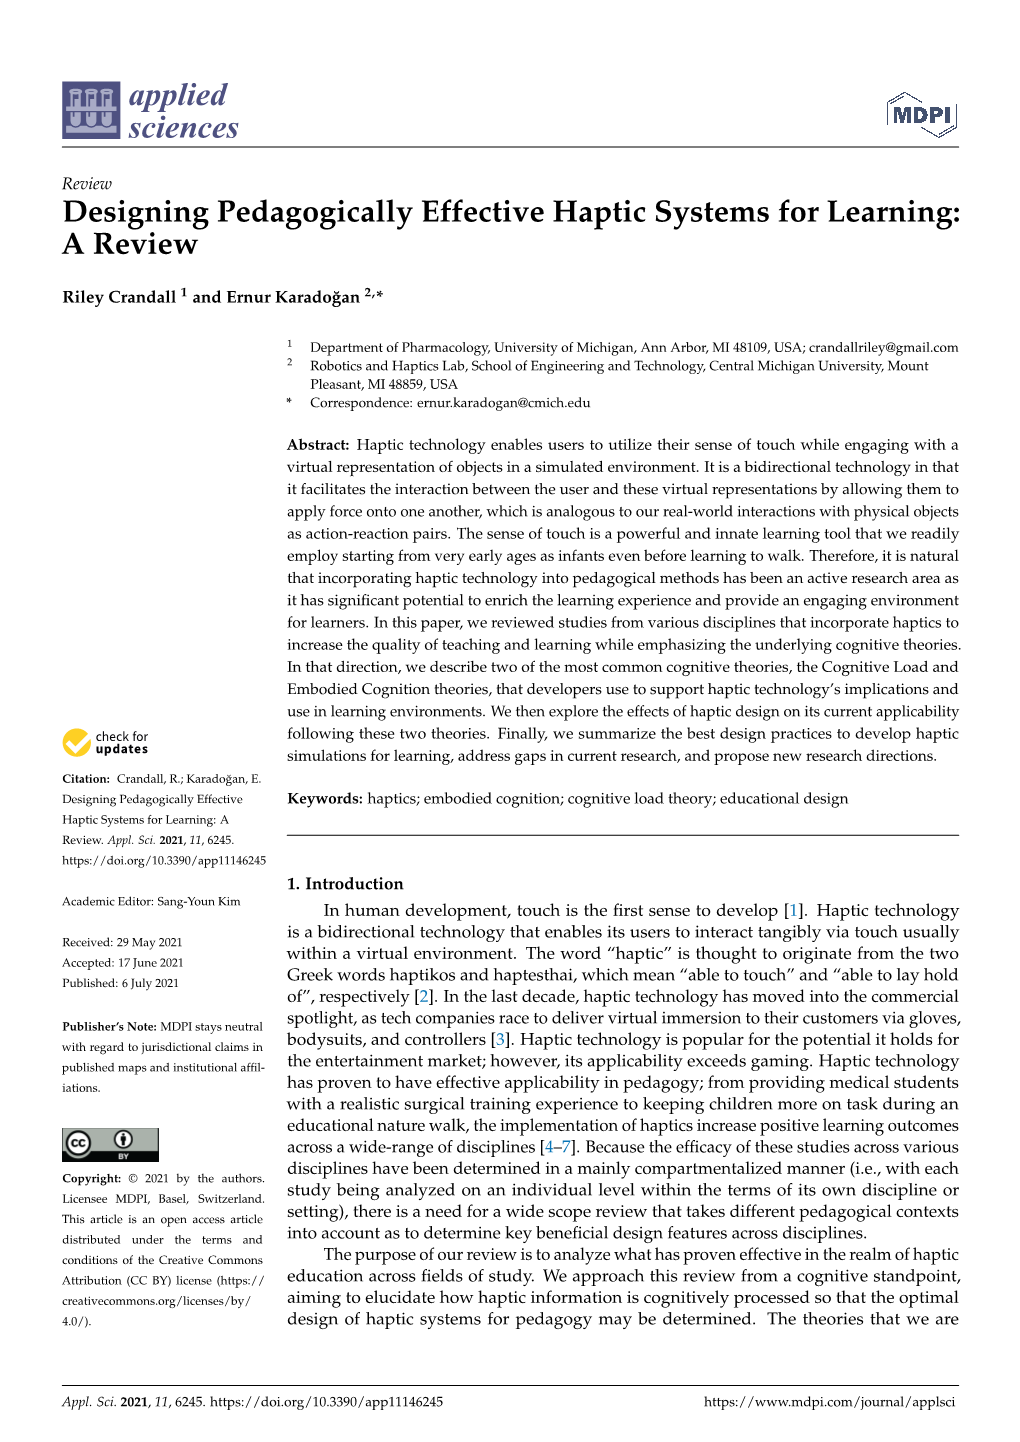 Designing Pedagogically Effective Haptic Systems for Learning: a Review